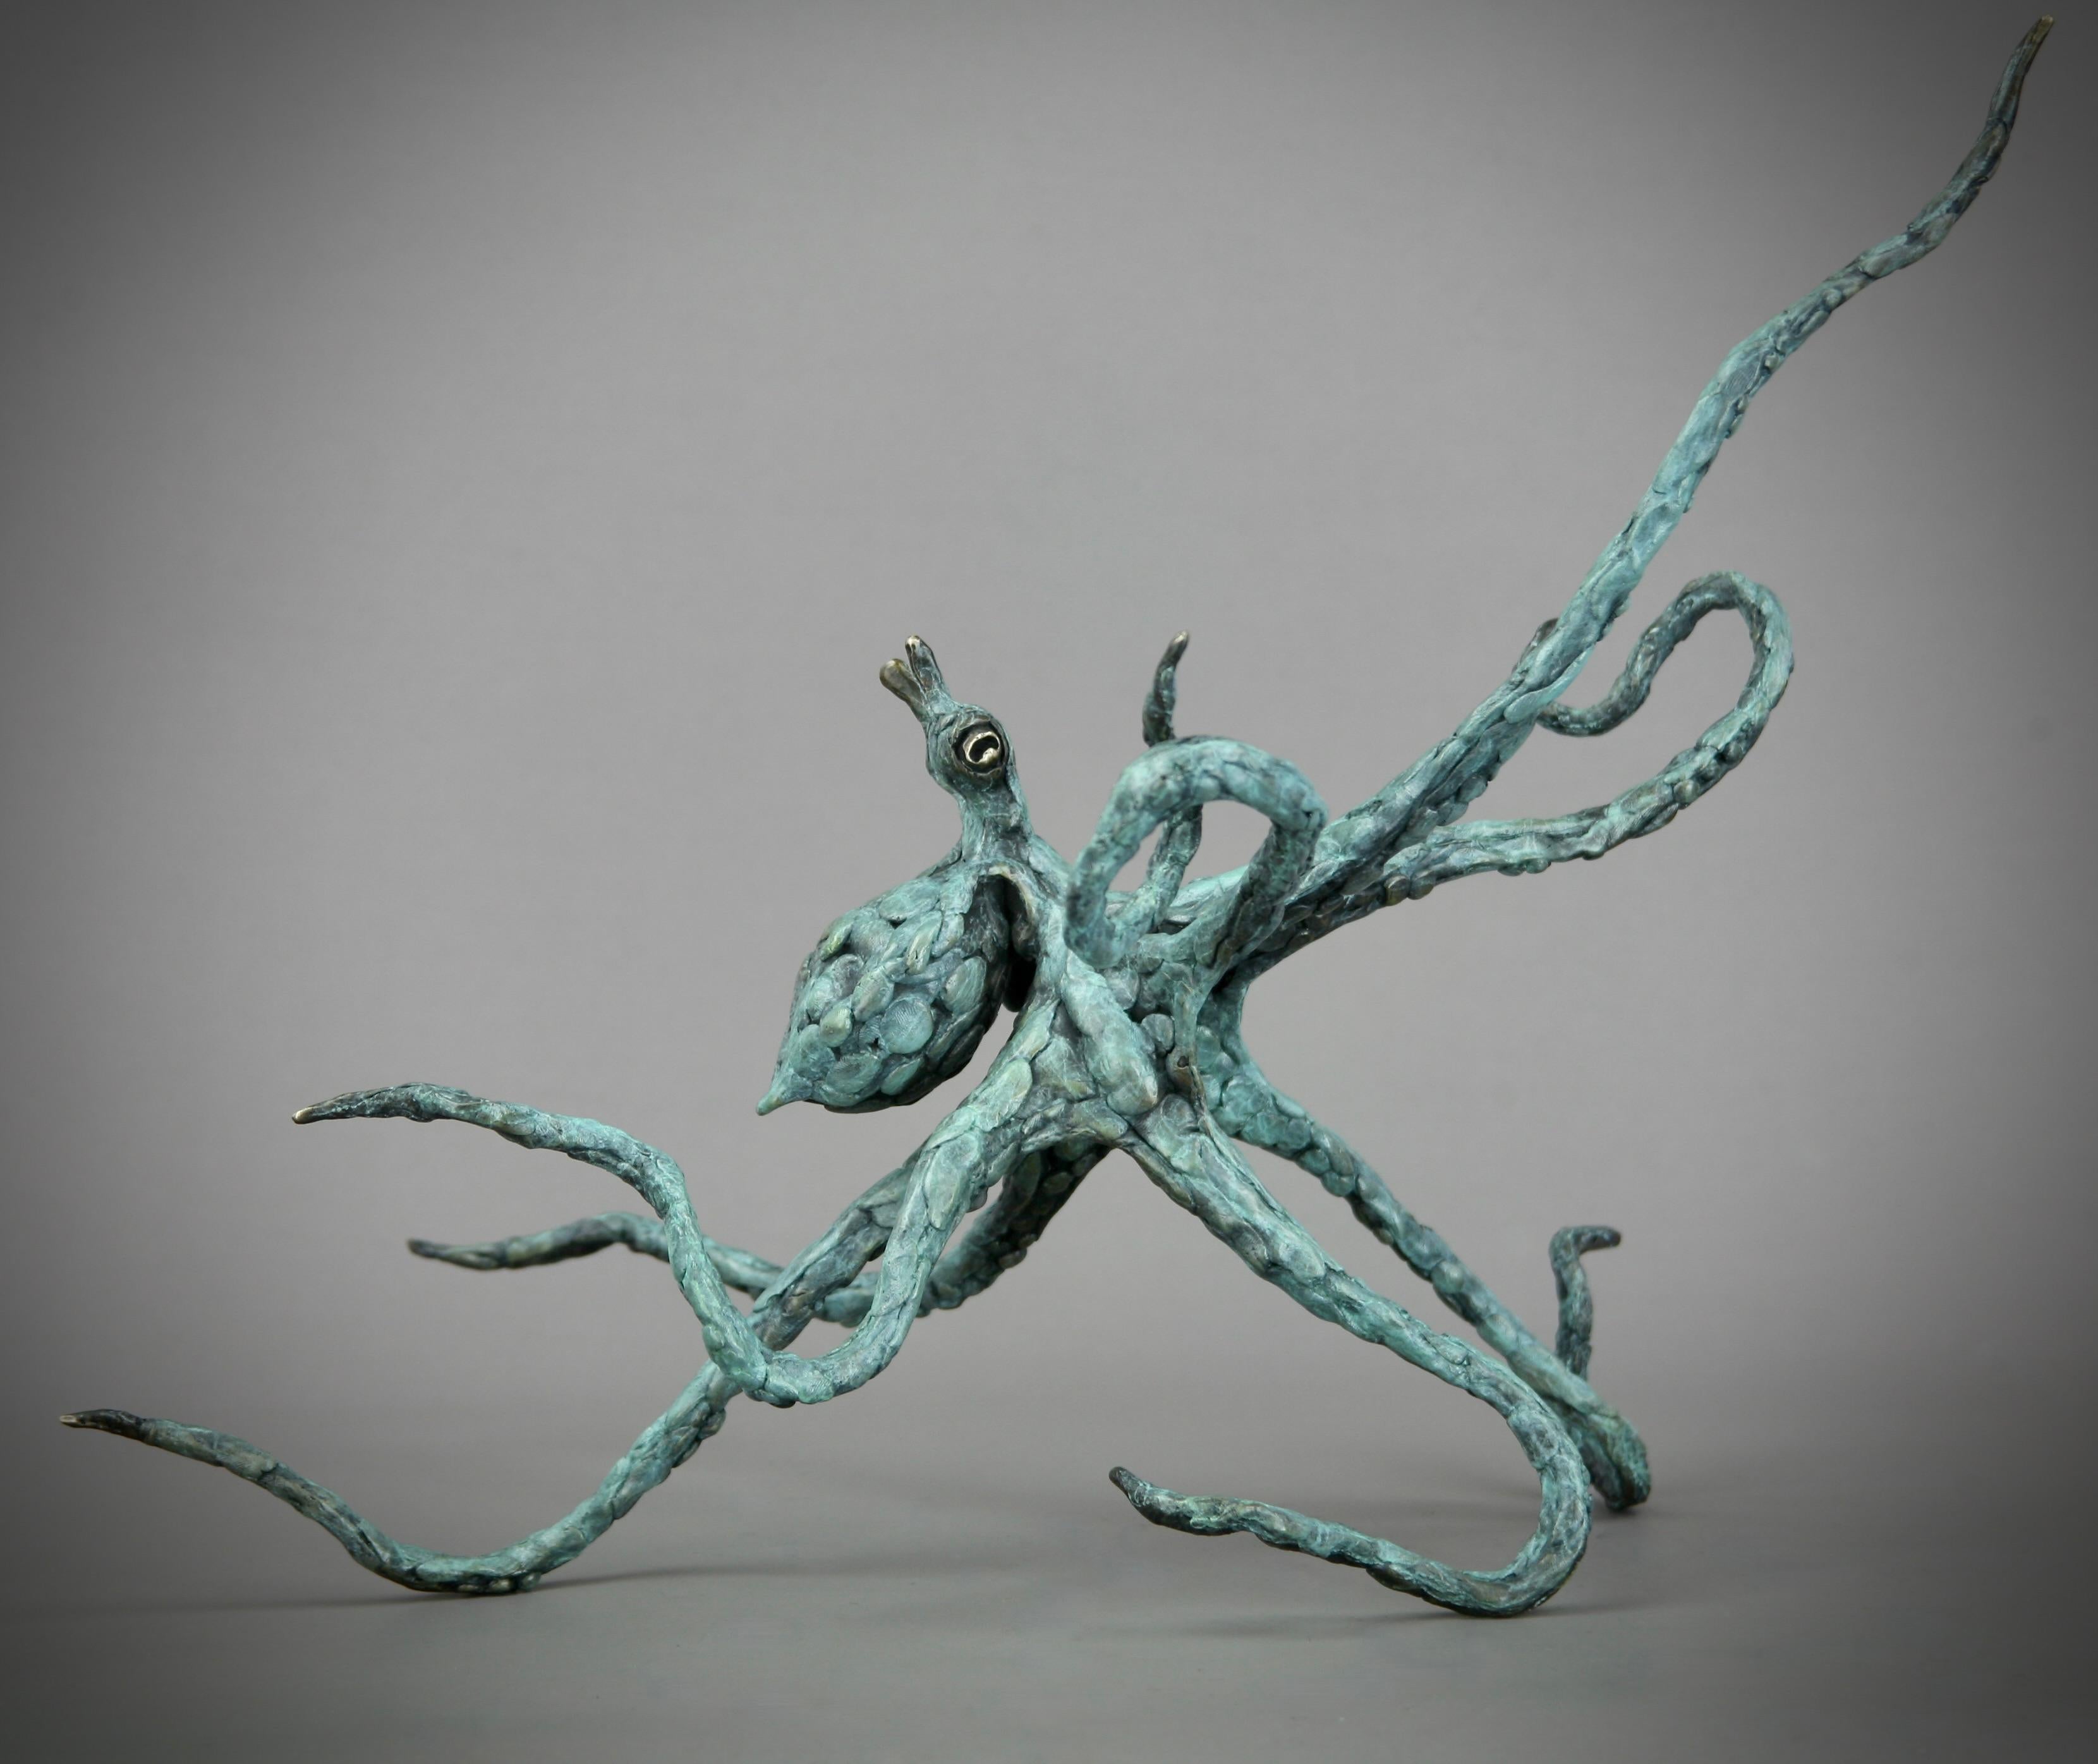 Octopus Green Patina- bronze sculpture- limited edition- Modern- Contemporary  - Sculpture by Andrzej Szymczyk